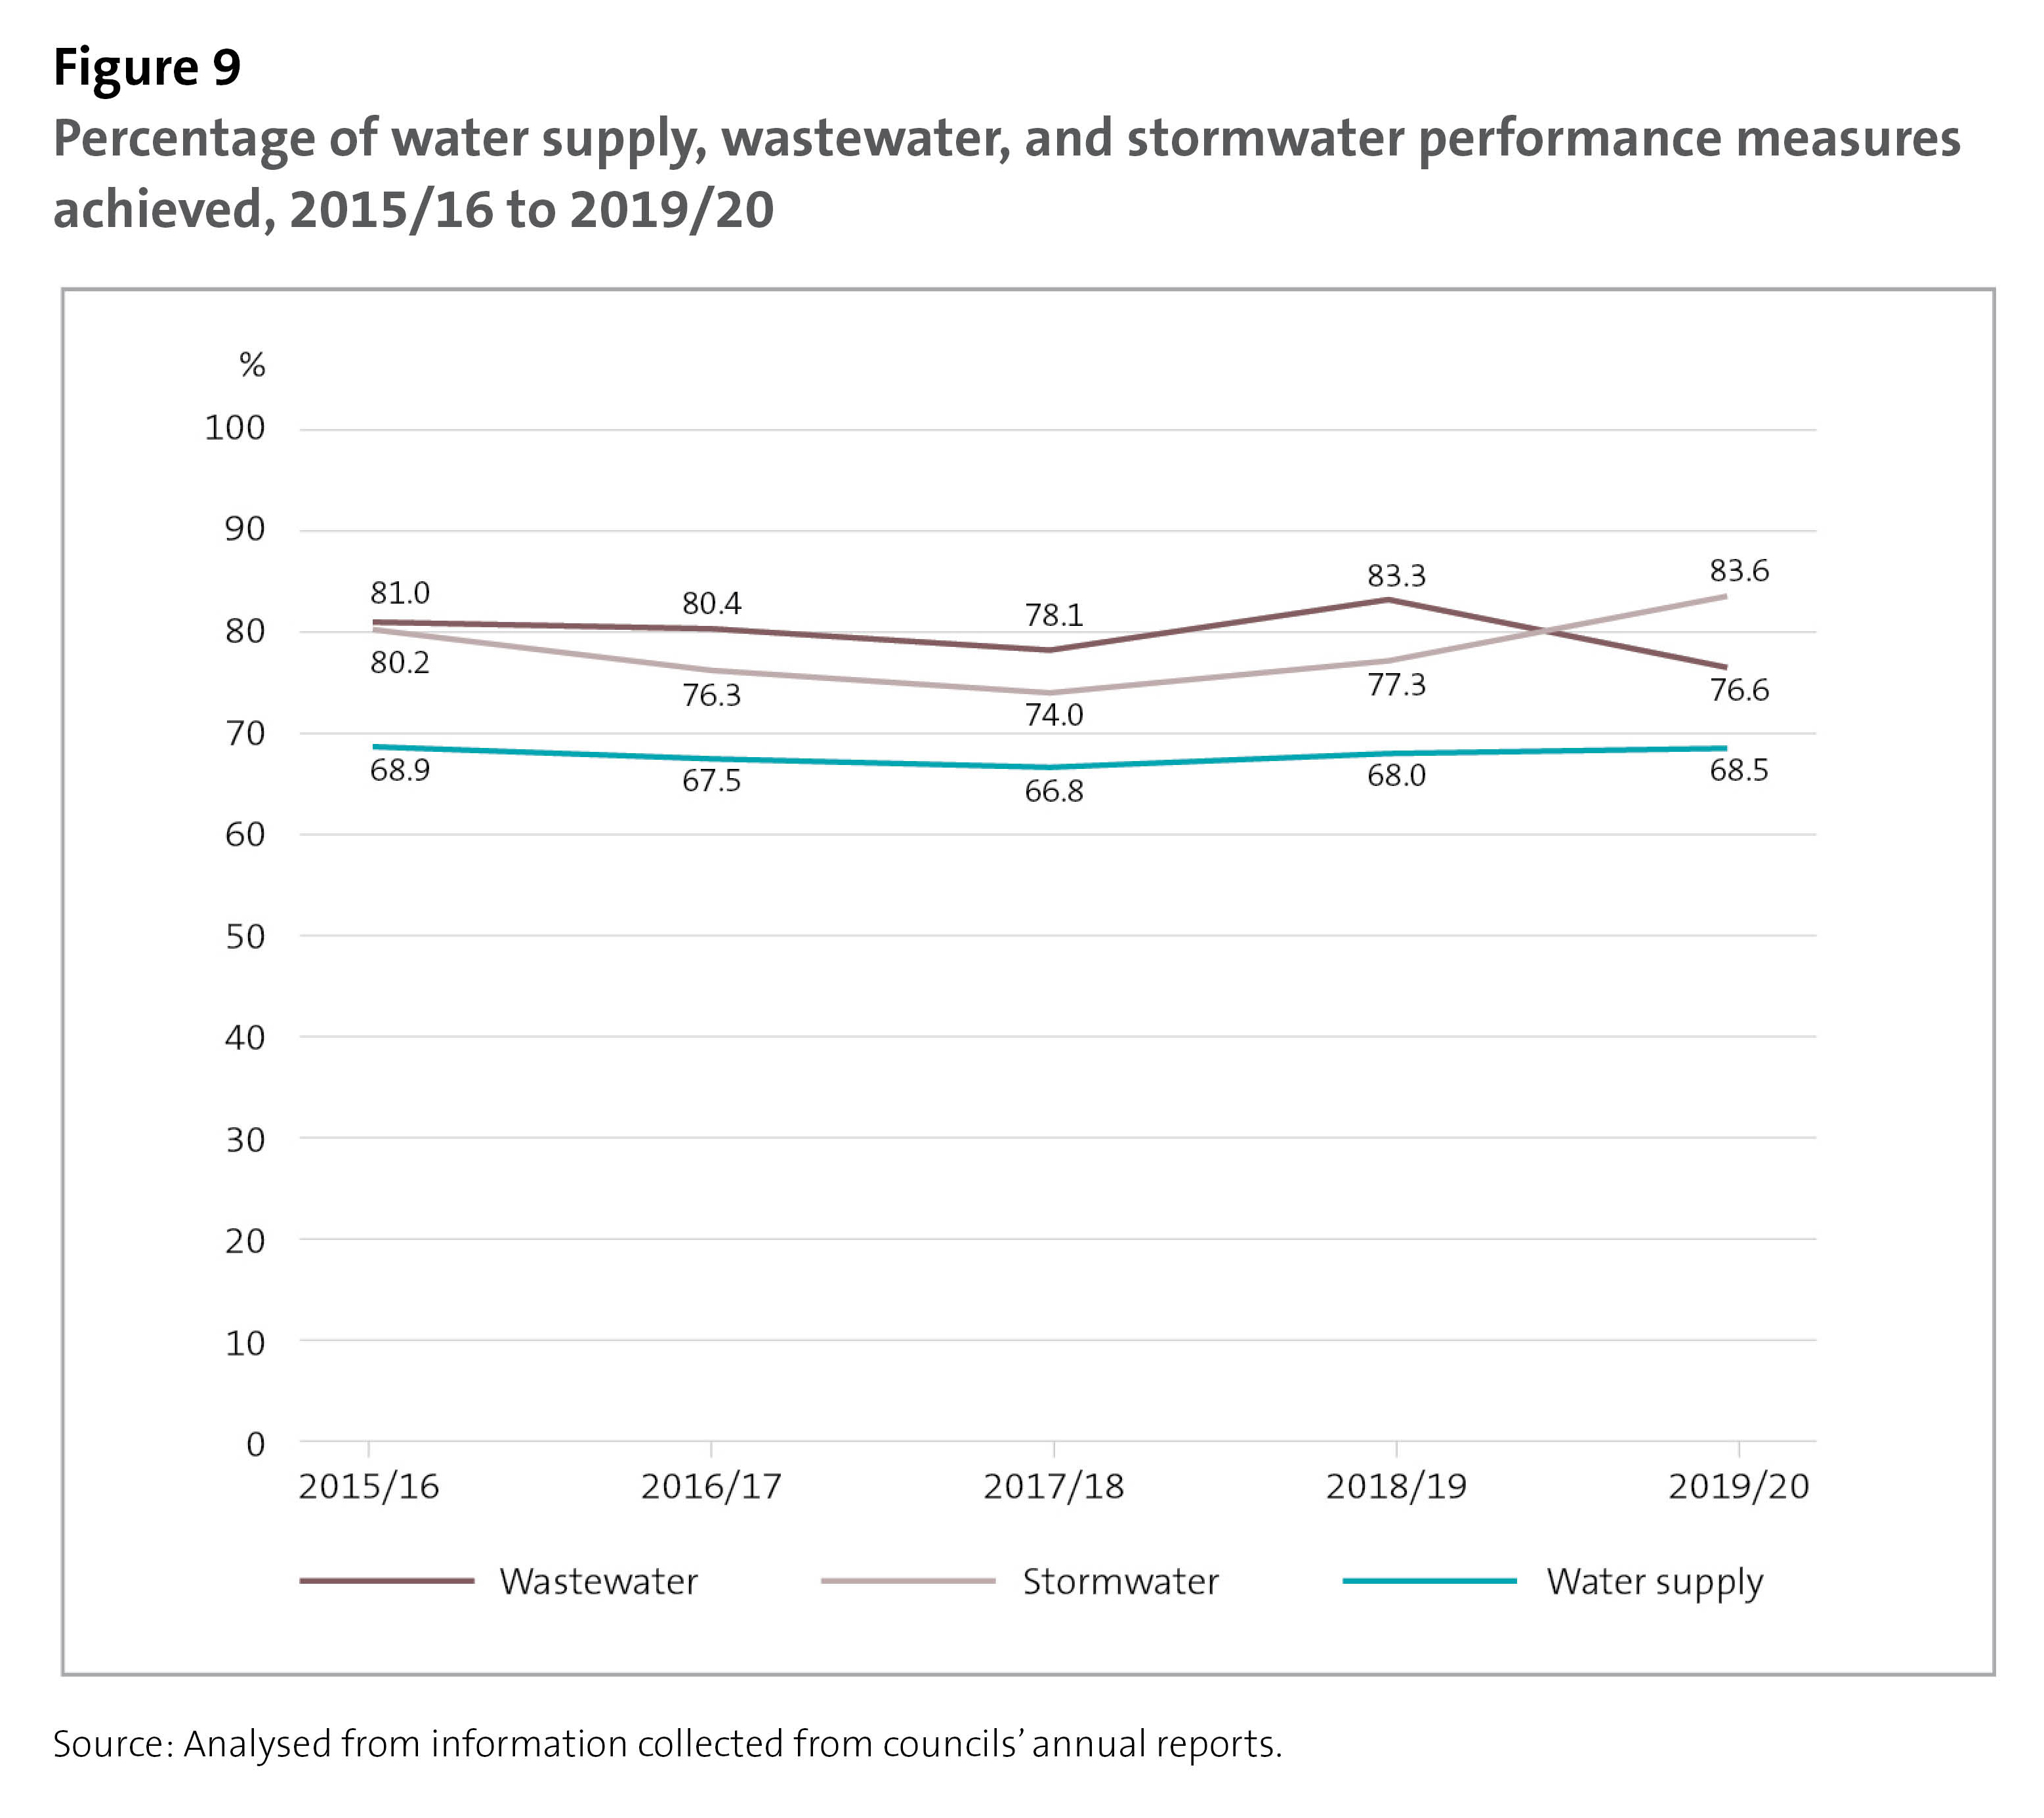 Figure 9 - Percentage of water supply, wastewater, and stormwater performance measures achieved, 2015/16 to 2019/20